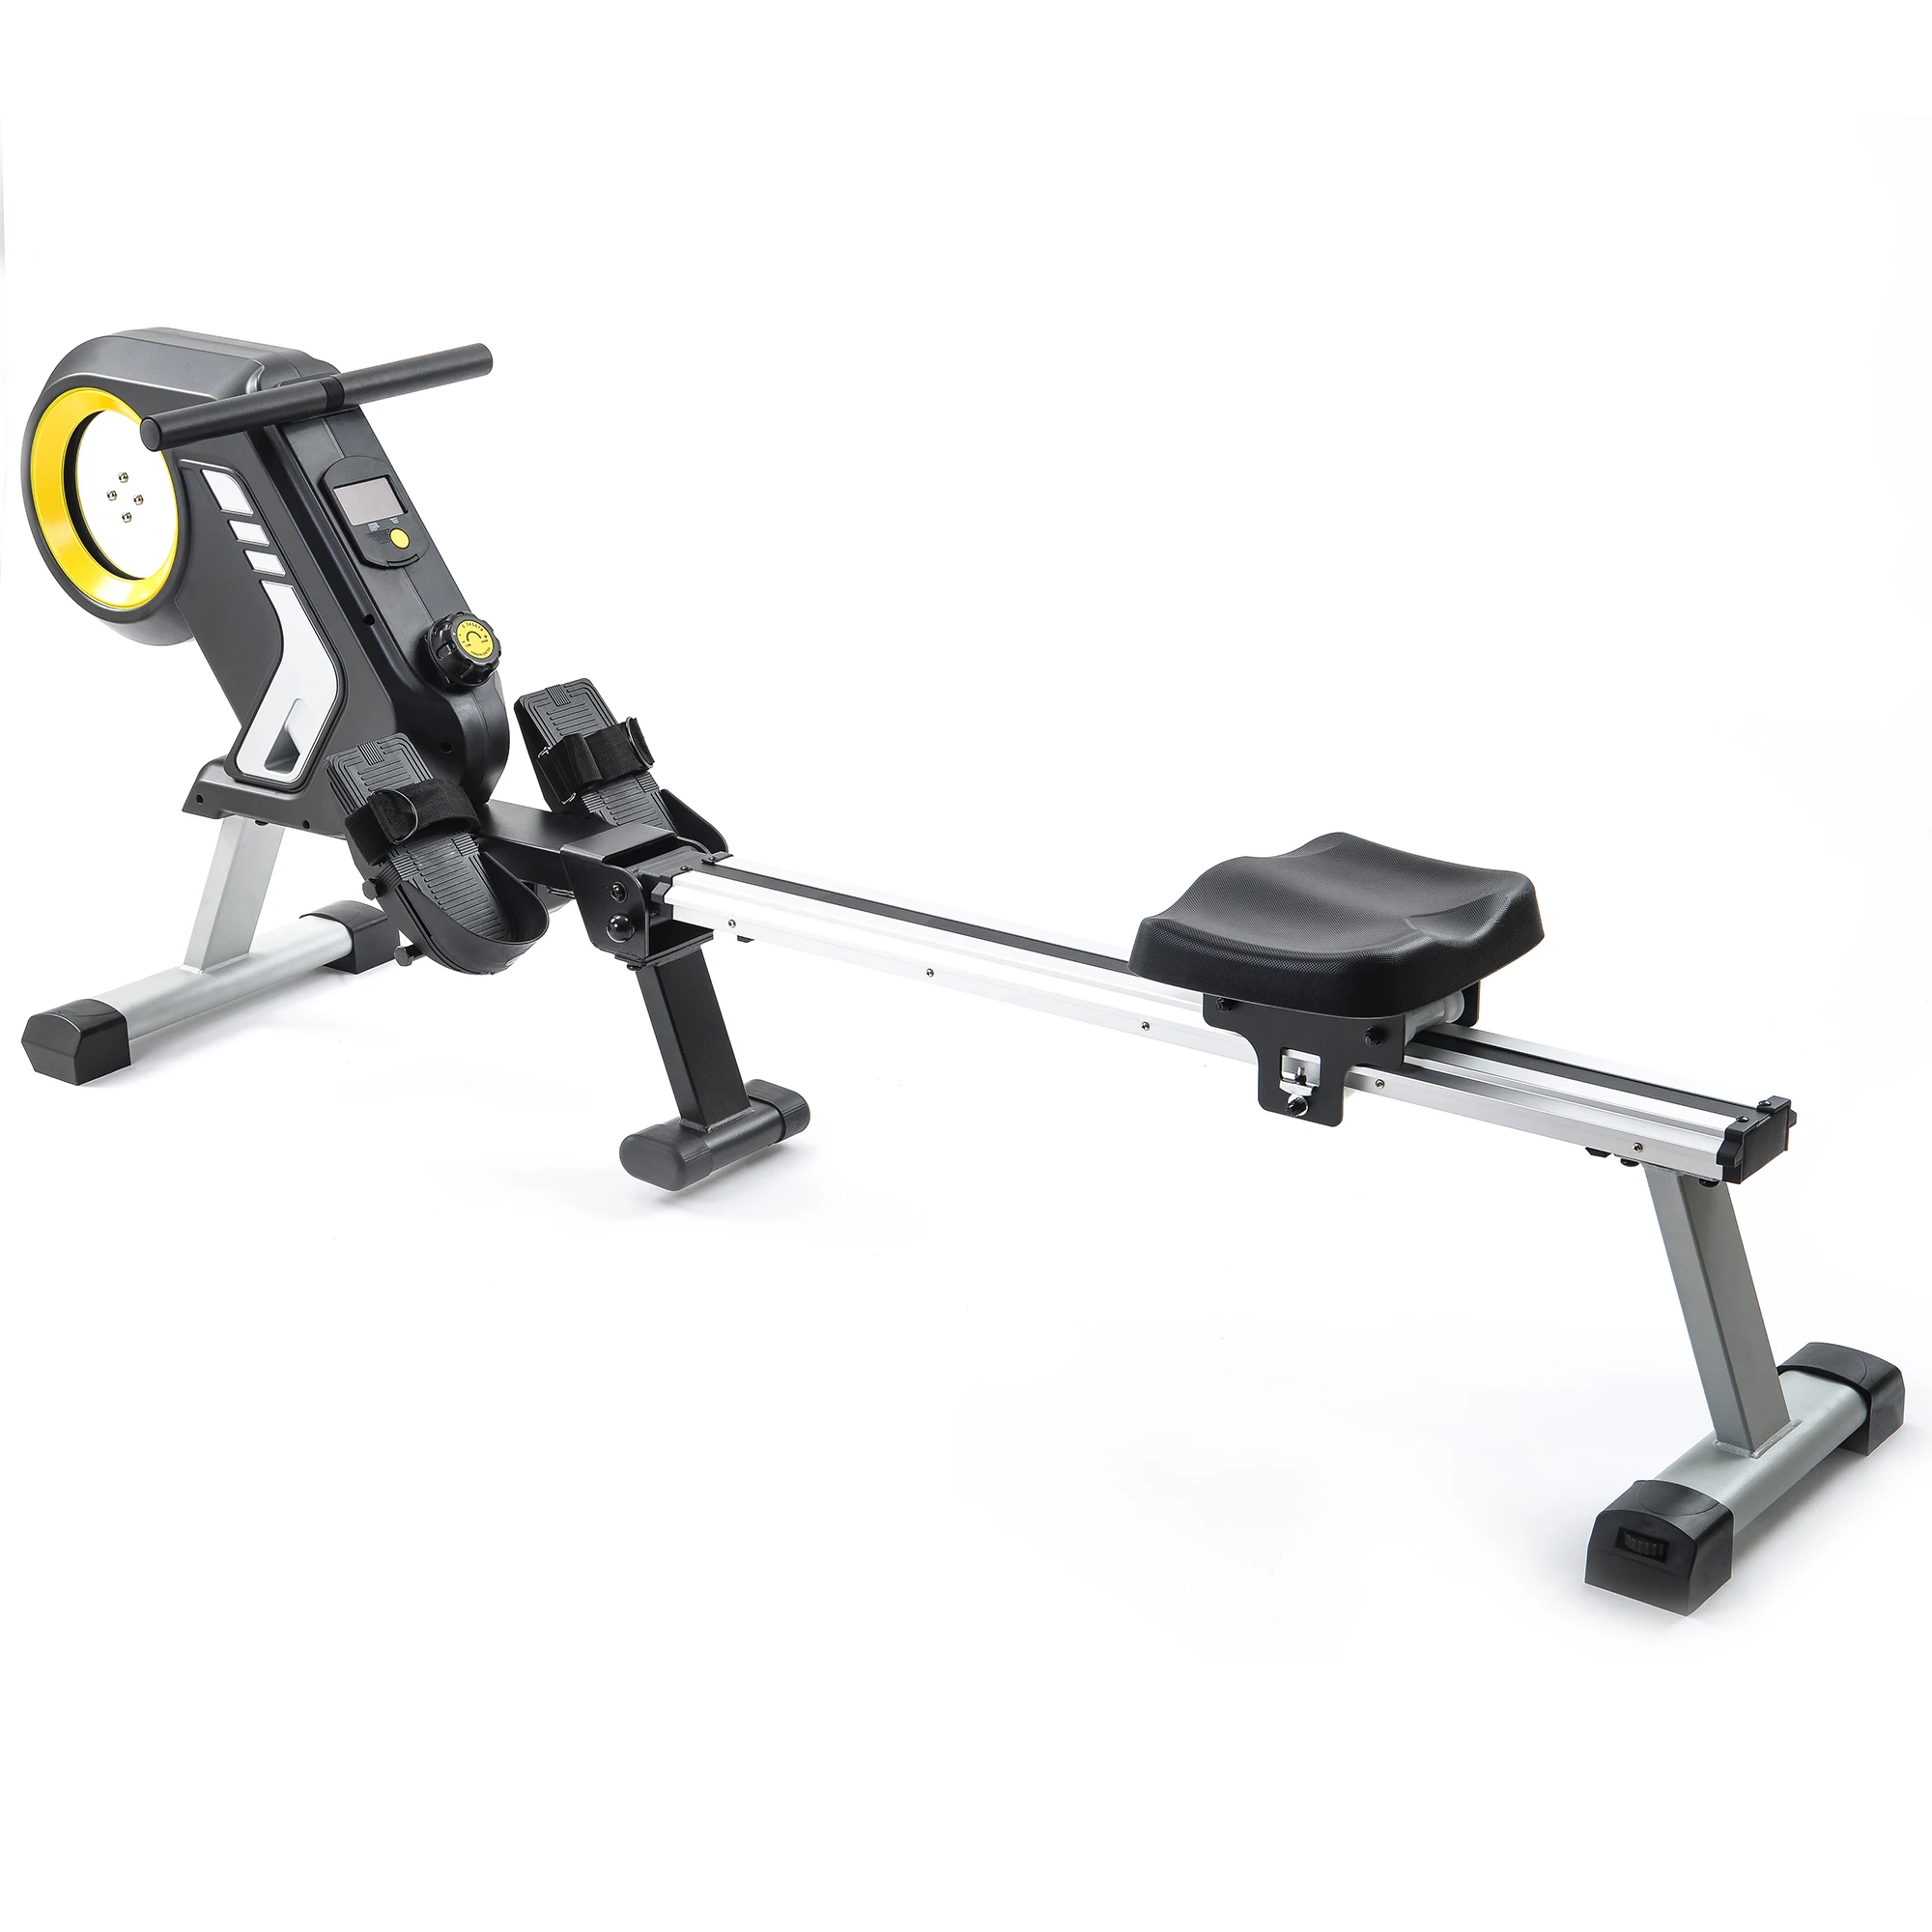 Magnetic Resistance Rowing Machine with Foldable Design, 8-Level Adjustable Resistance, Transport Wheels, Black & Yellow (New)